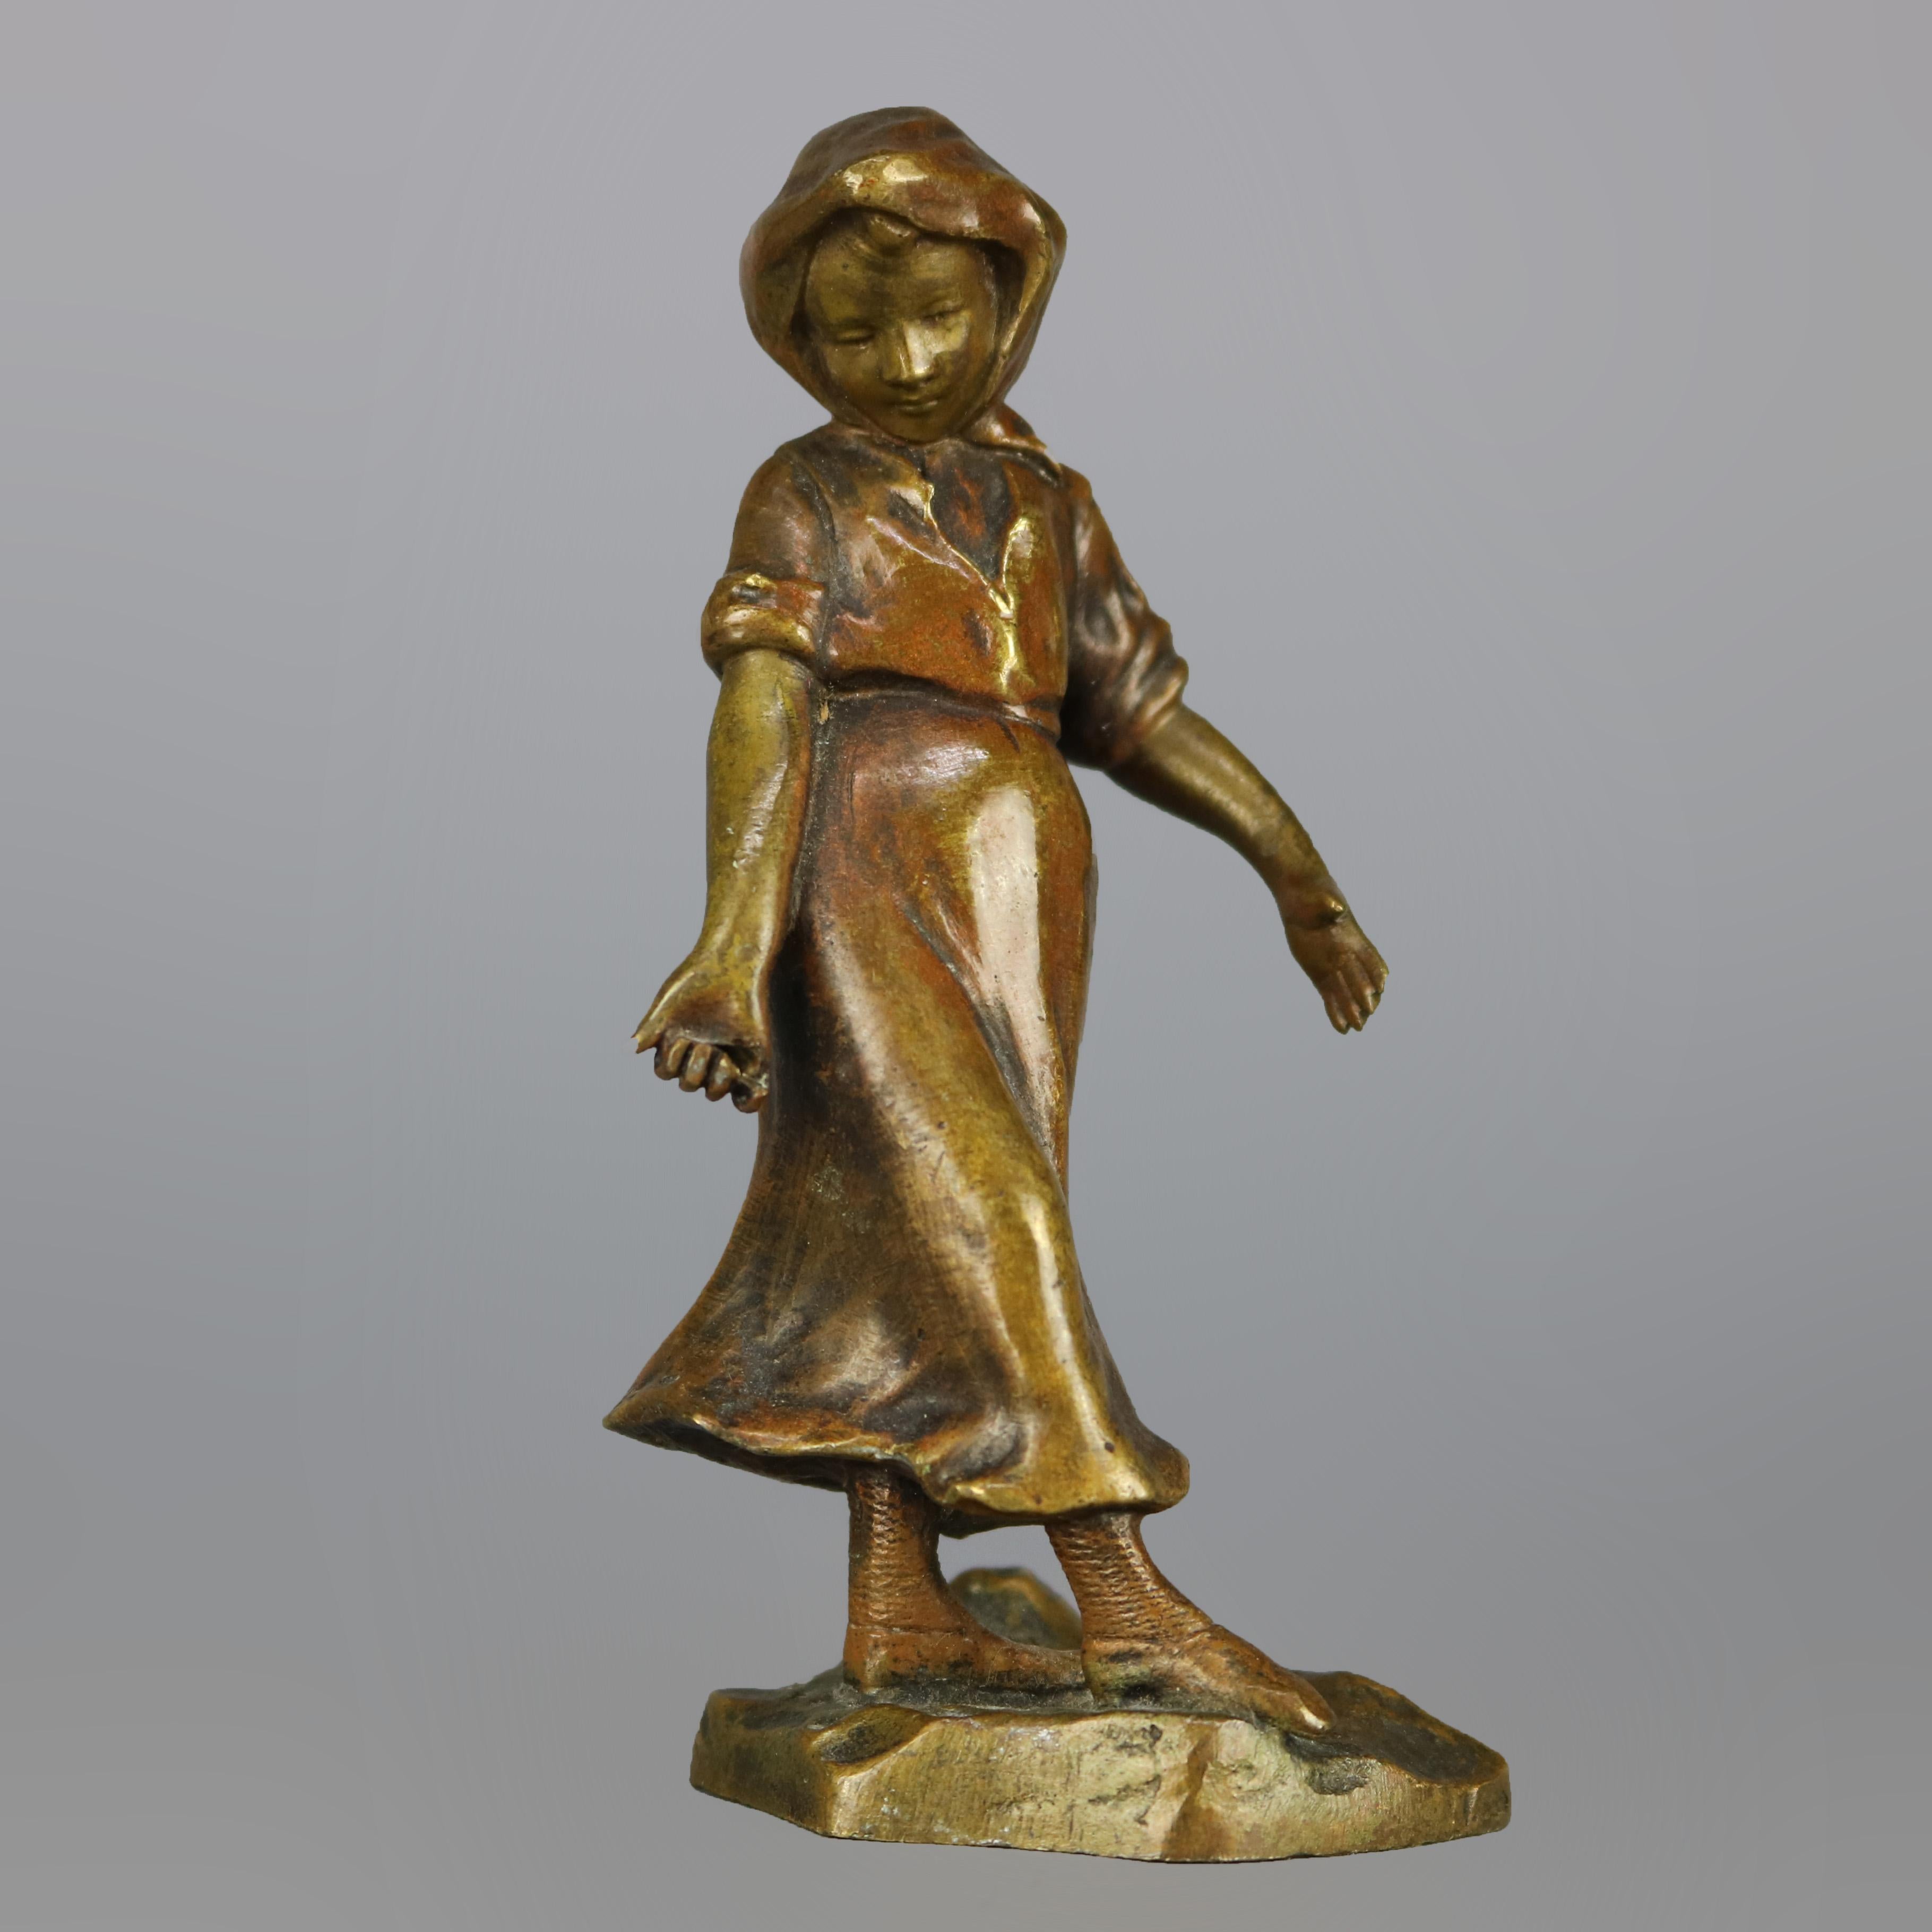 An antique continental figural cabinet sculpture offers cast bronze construction and depicts young barefoot girl walking in countryside setting, circa 1900

Measures: 4